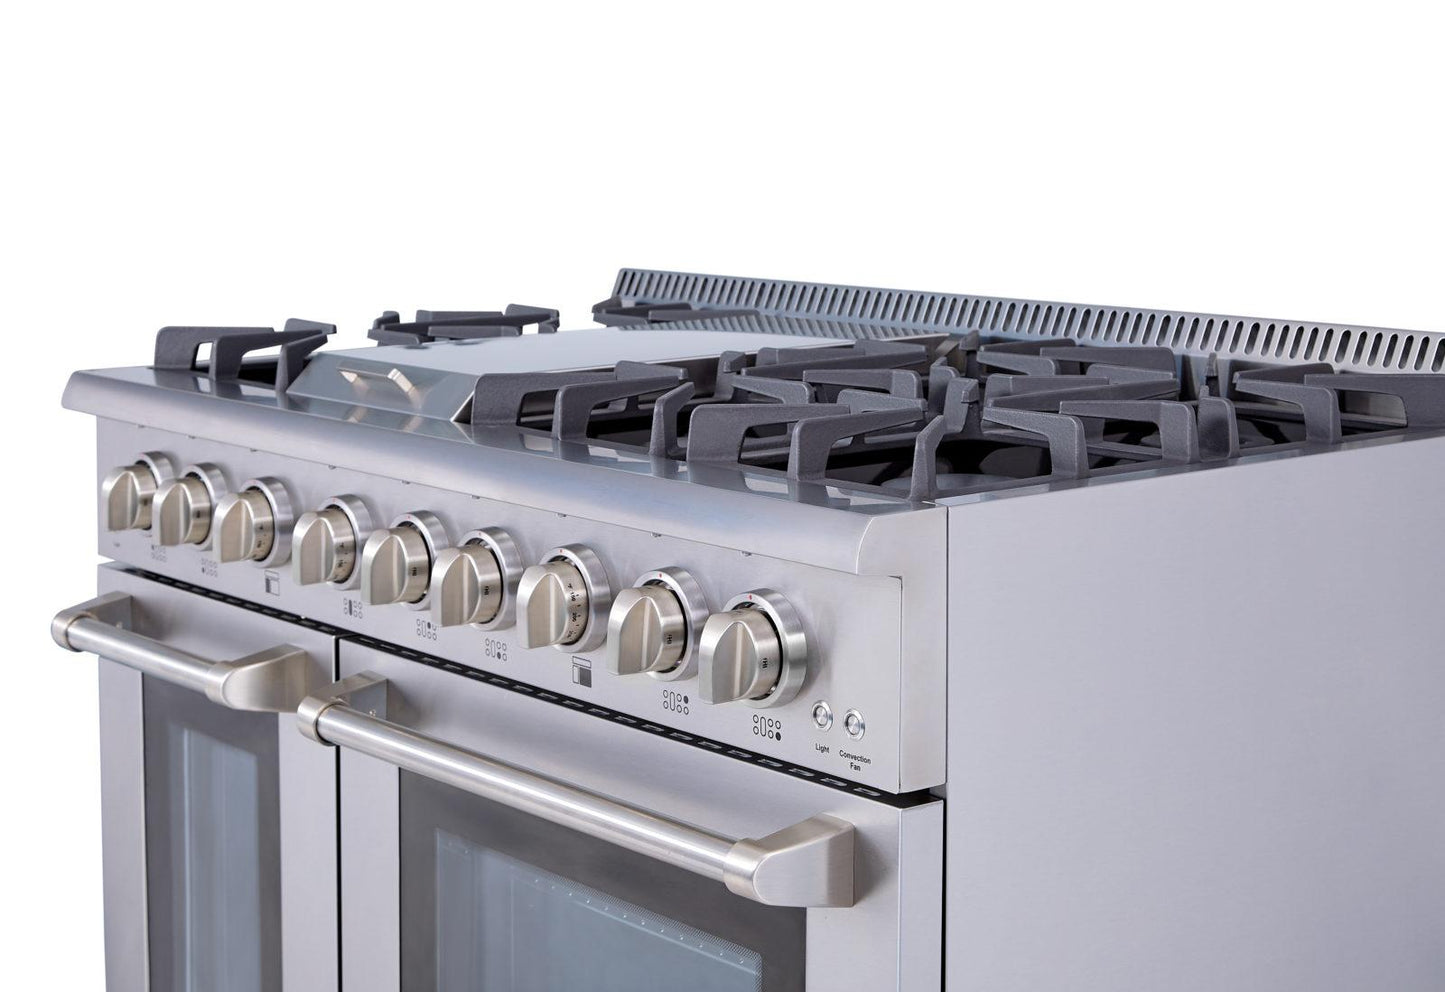 Thor Kitchen HRD4803ULP 48 Inch Professional Dual Fuel Lp Gas Range In Stainless Steel